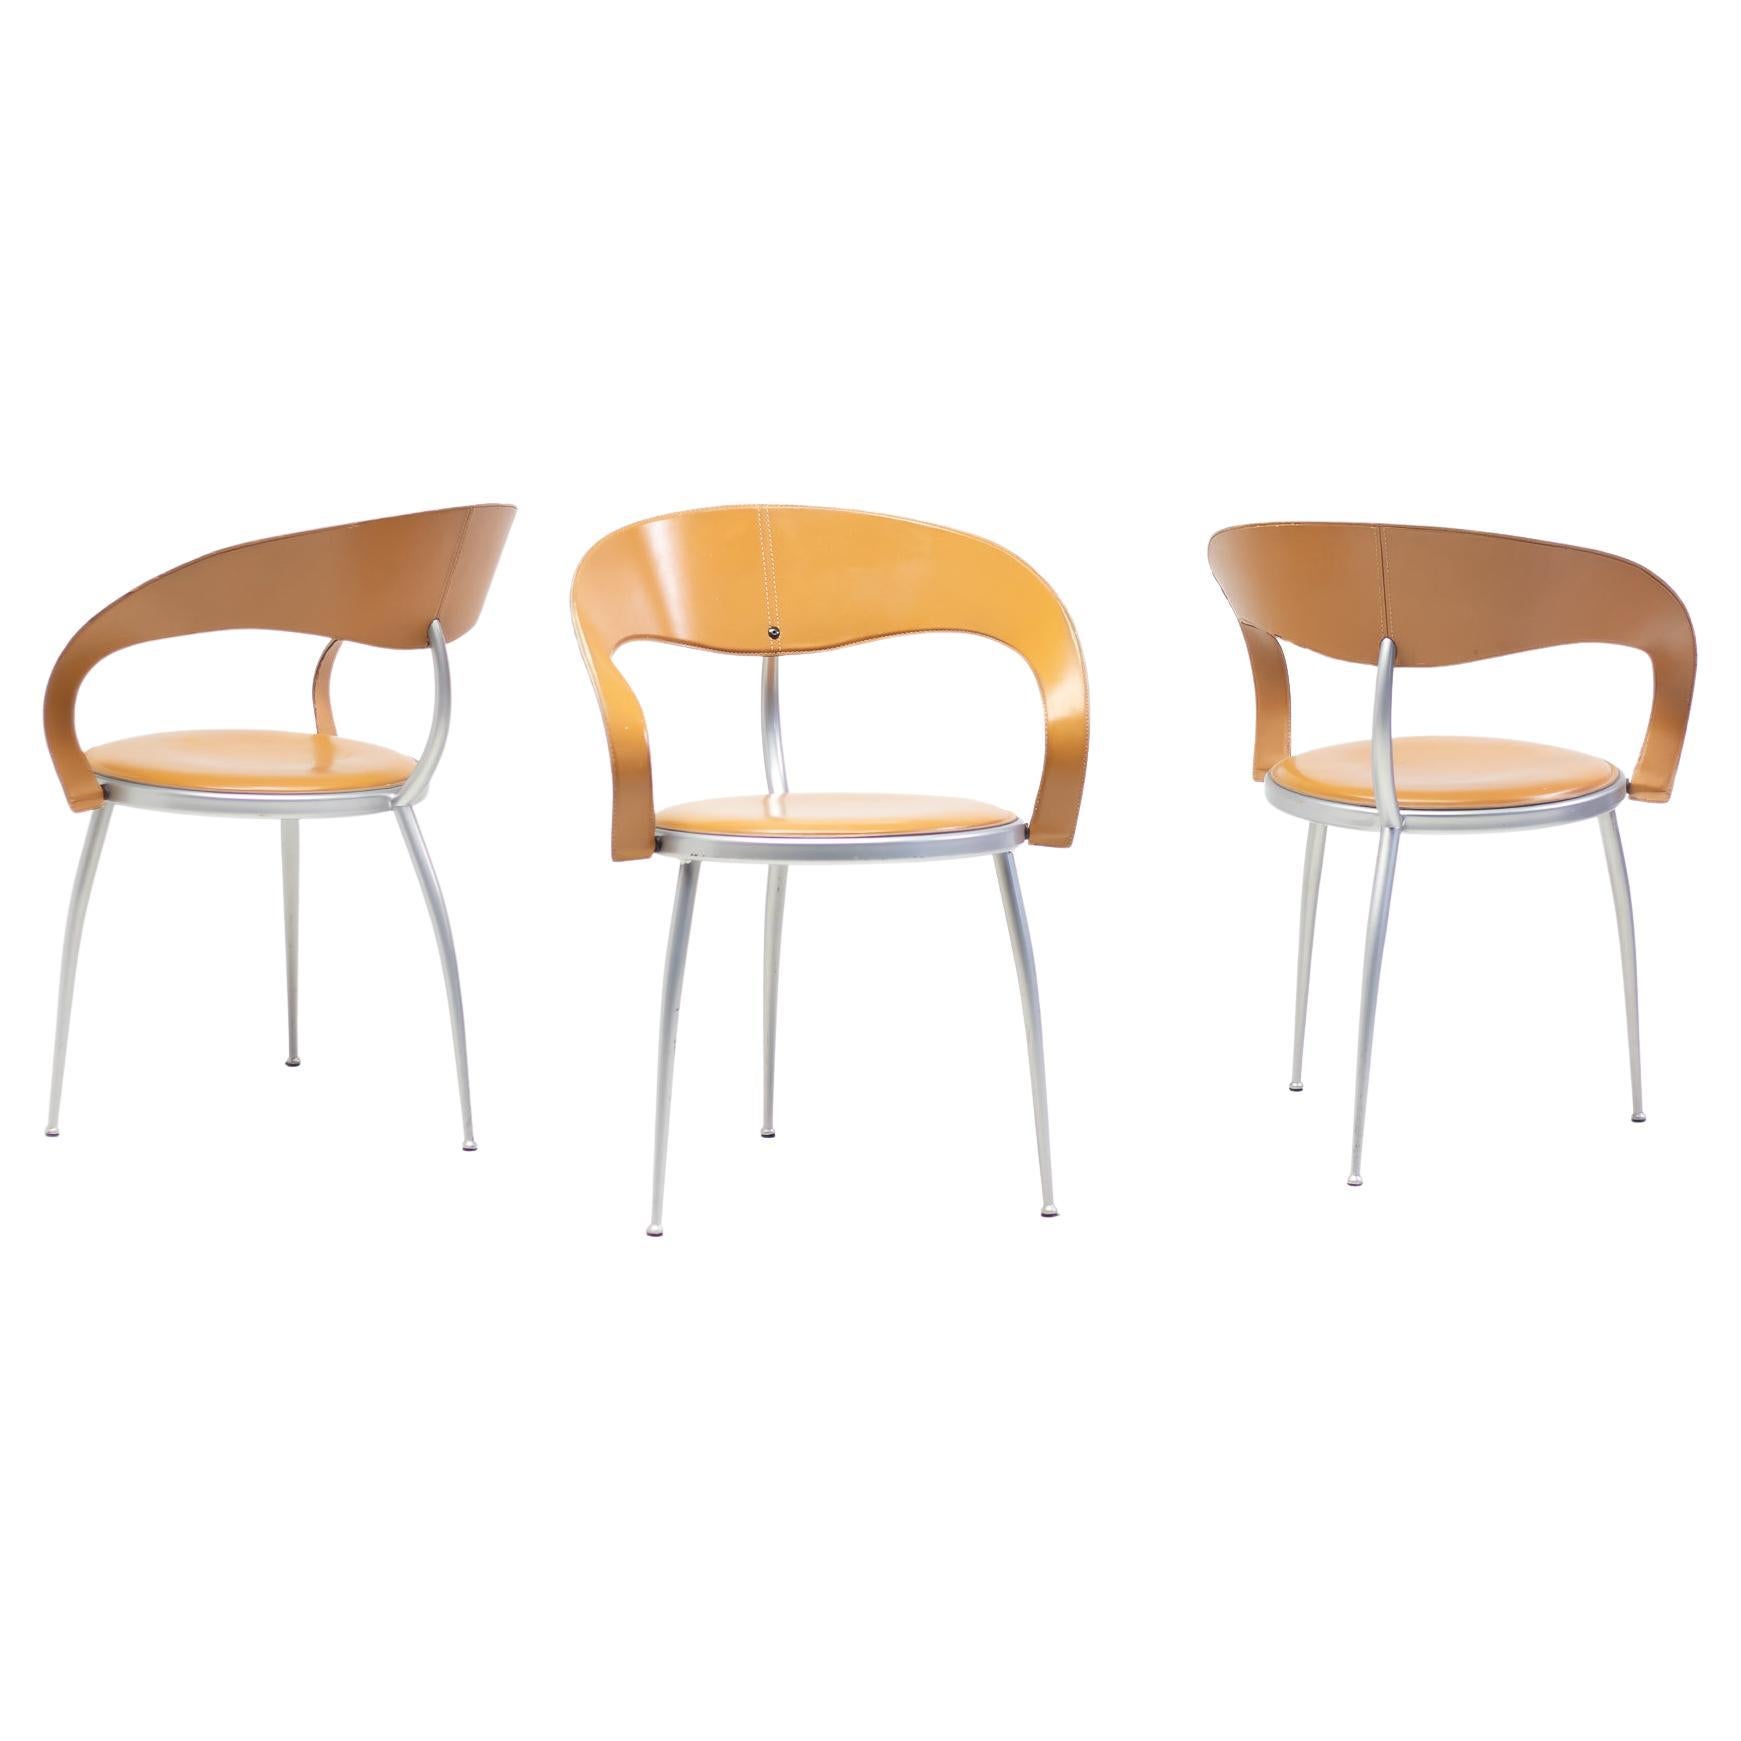 Set of Three Calligaris Chairs in Leather